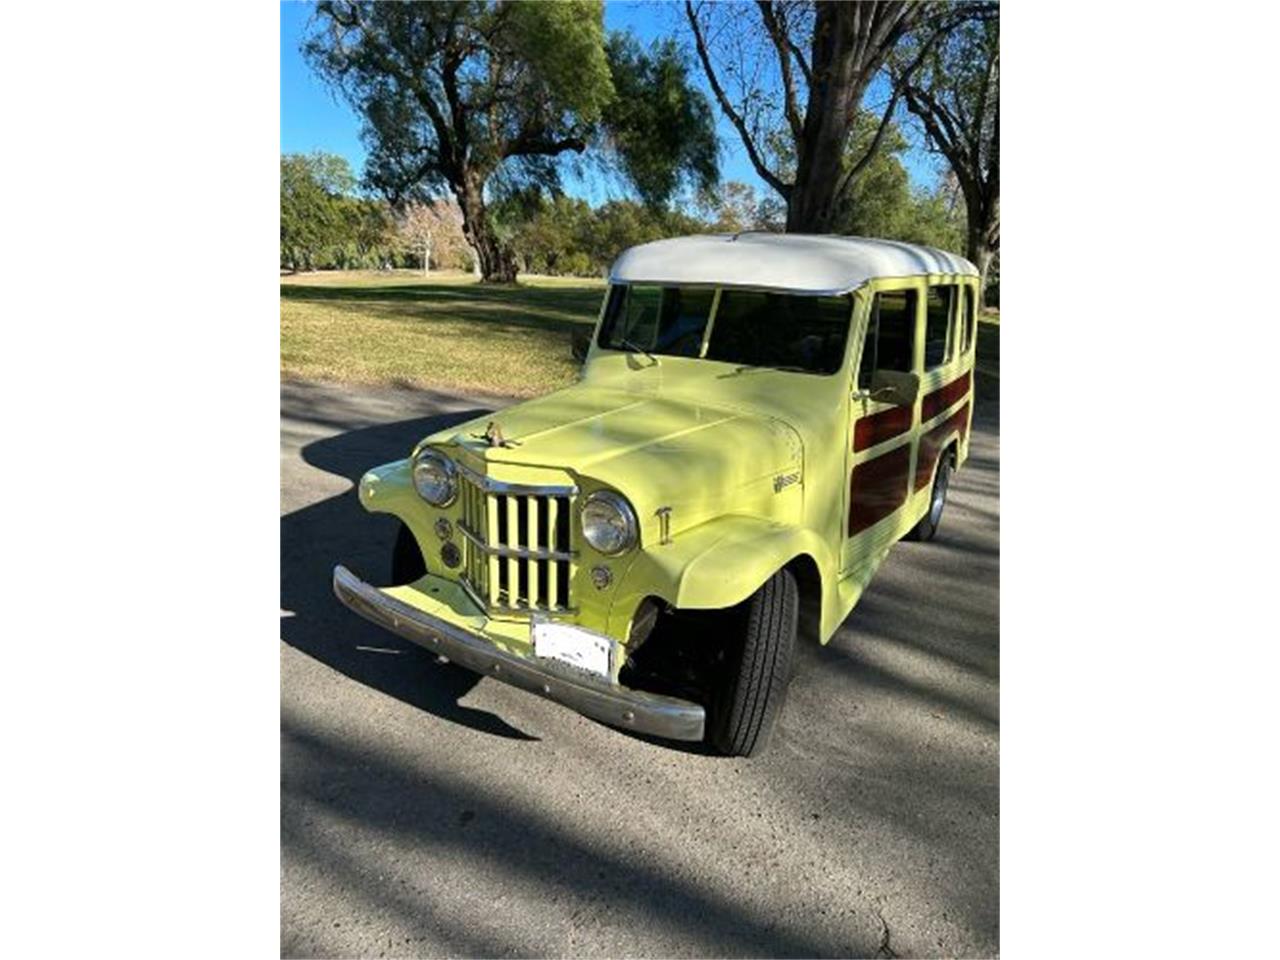 For Sale: 1957 Willys Jeep in Cadillac, Michigan for sale in Cadillac, MI